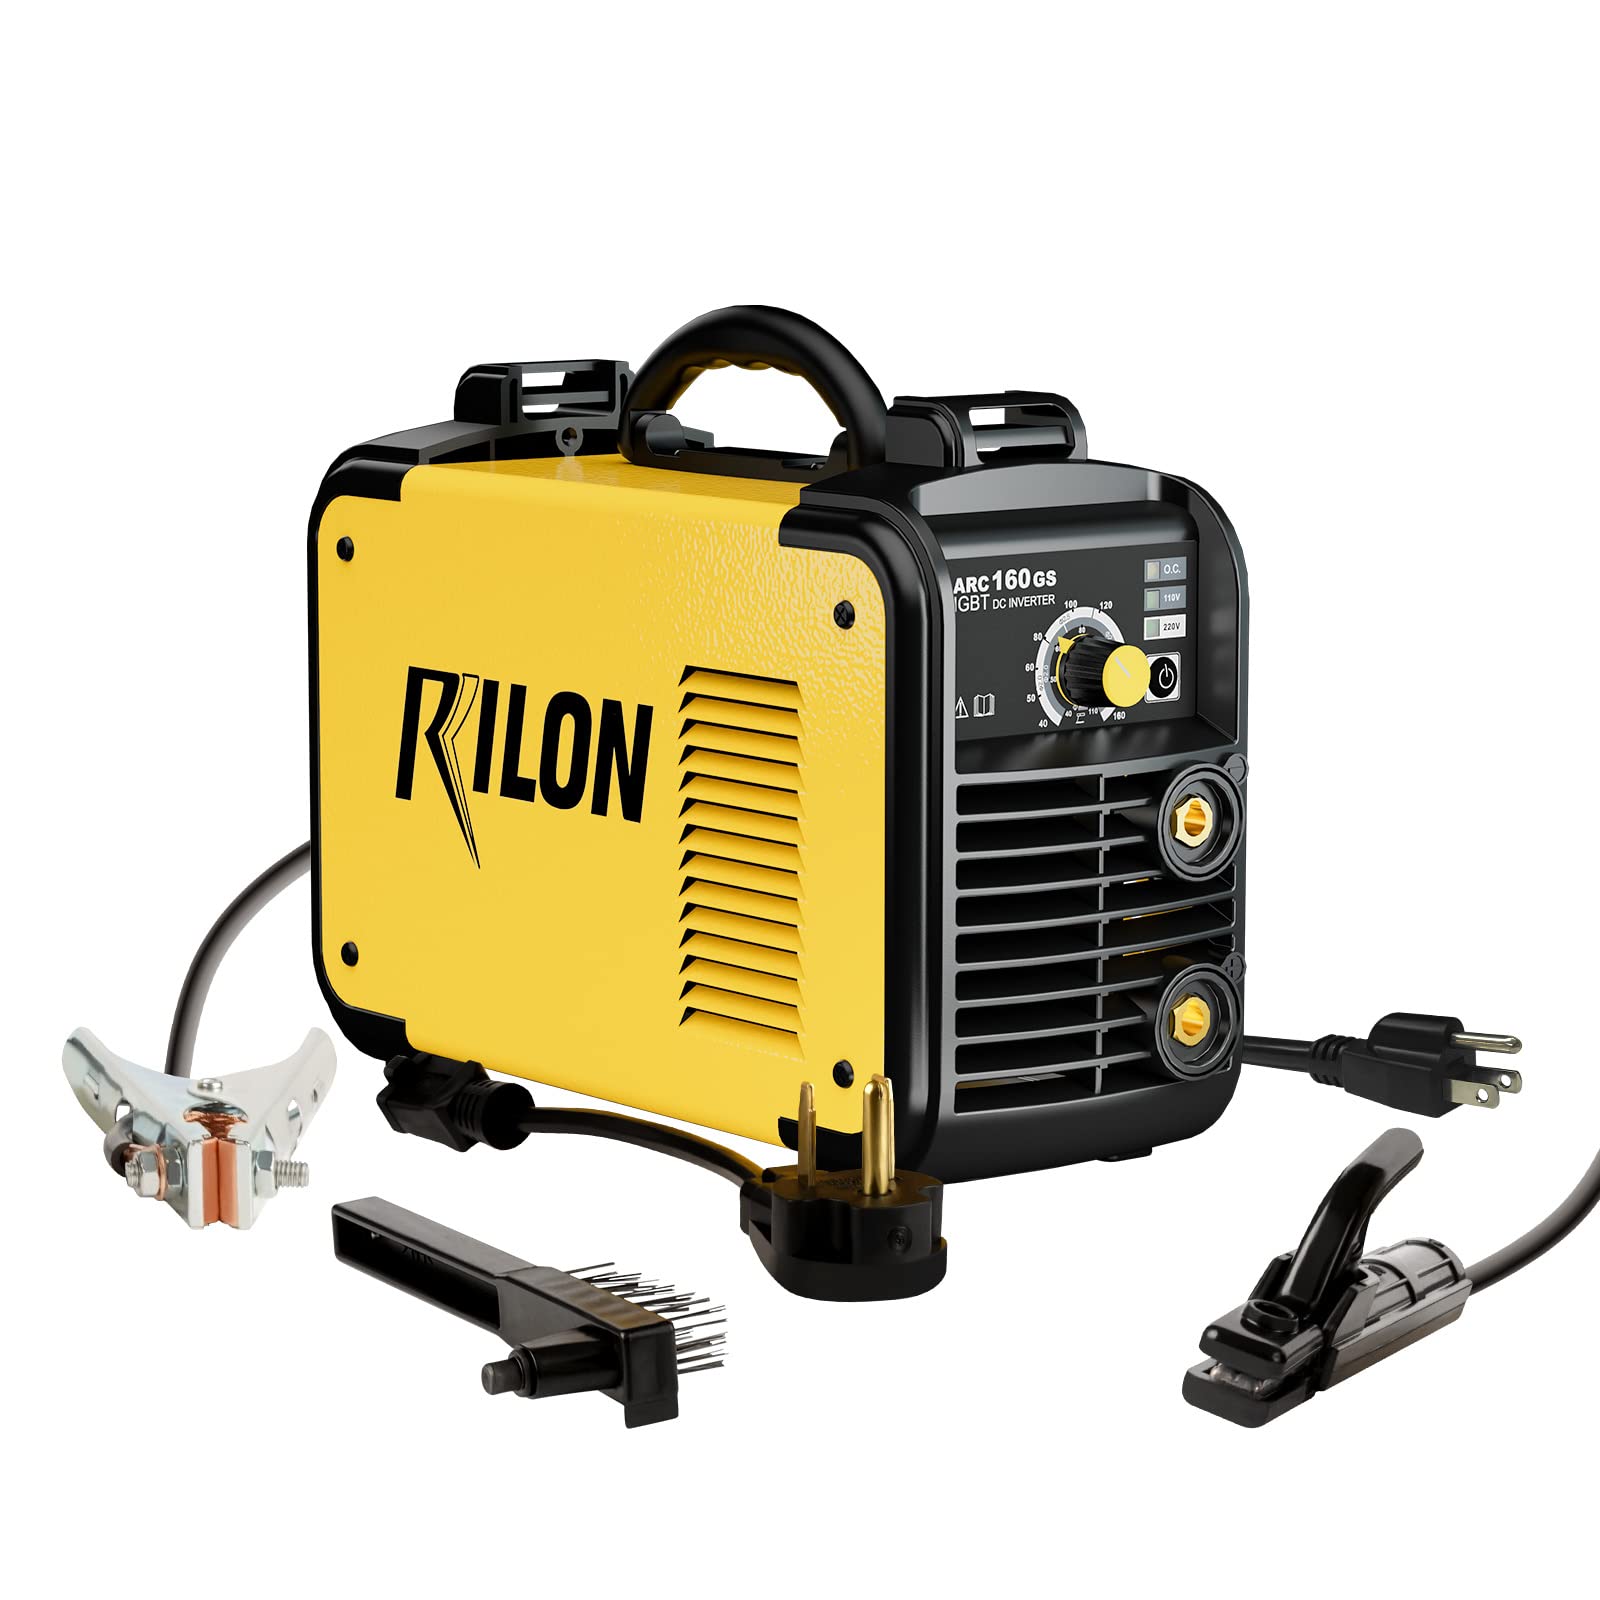 Rilon Dual Voltage 160A Stick Portable Welder for Beginners $94.99 + Free Shipping